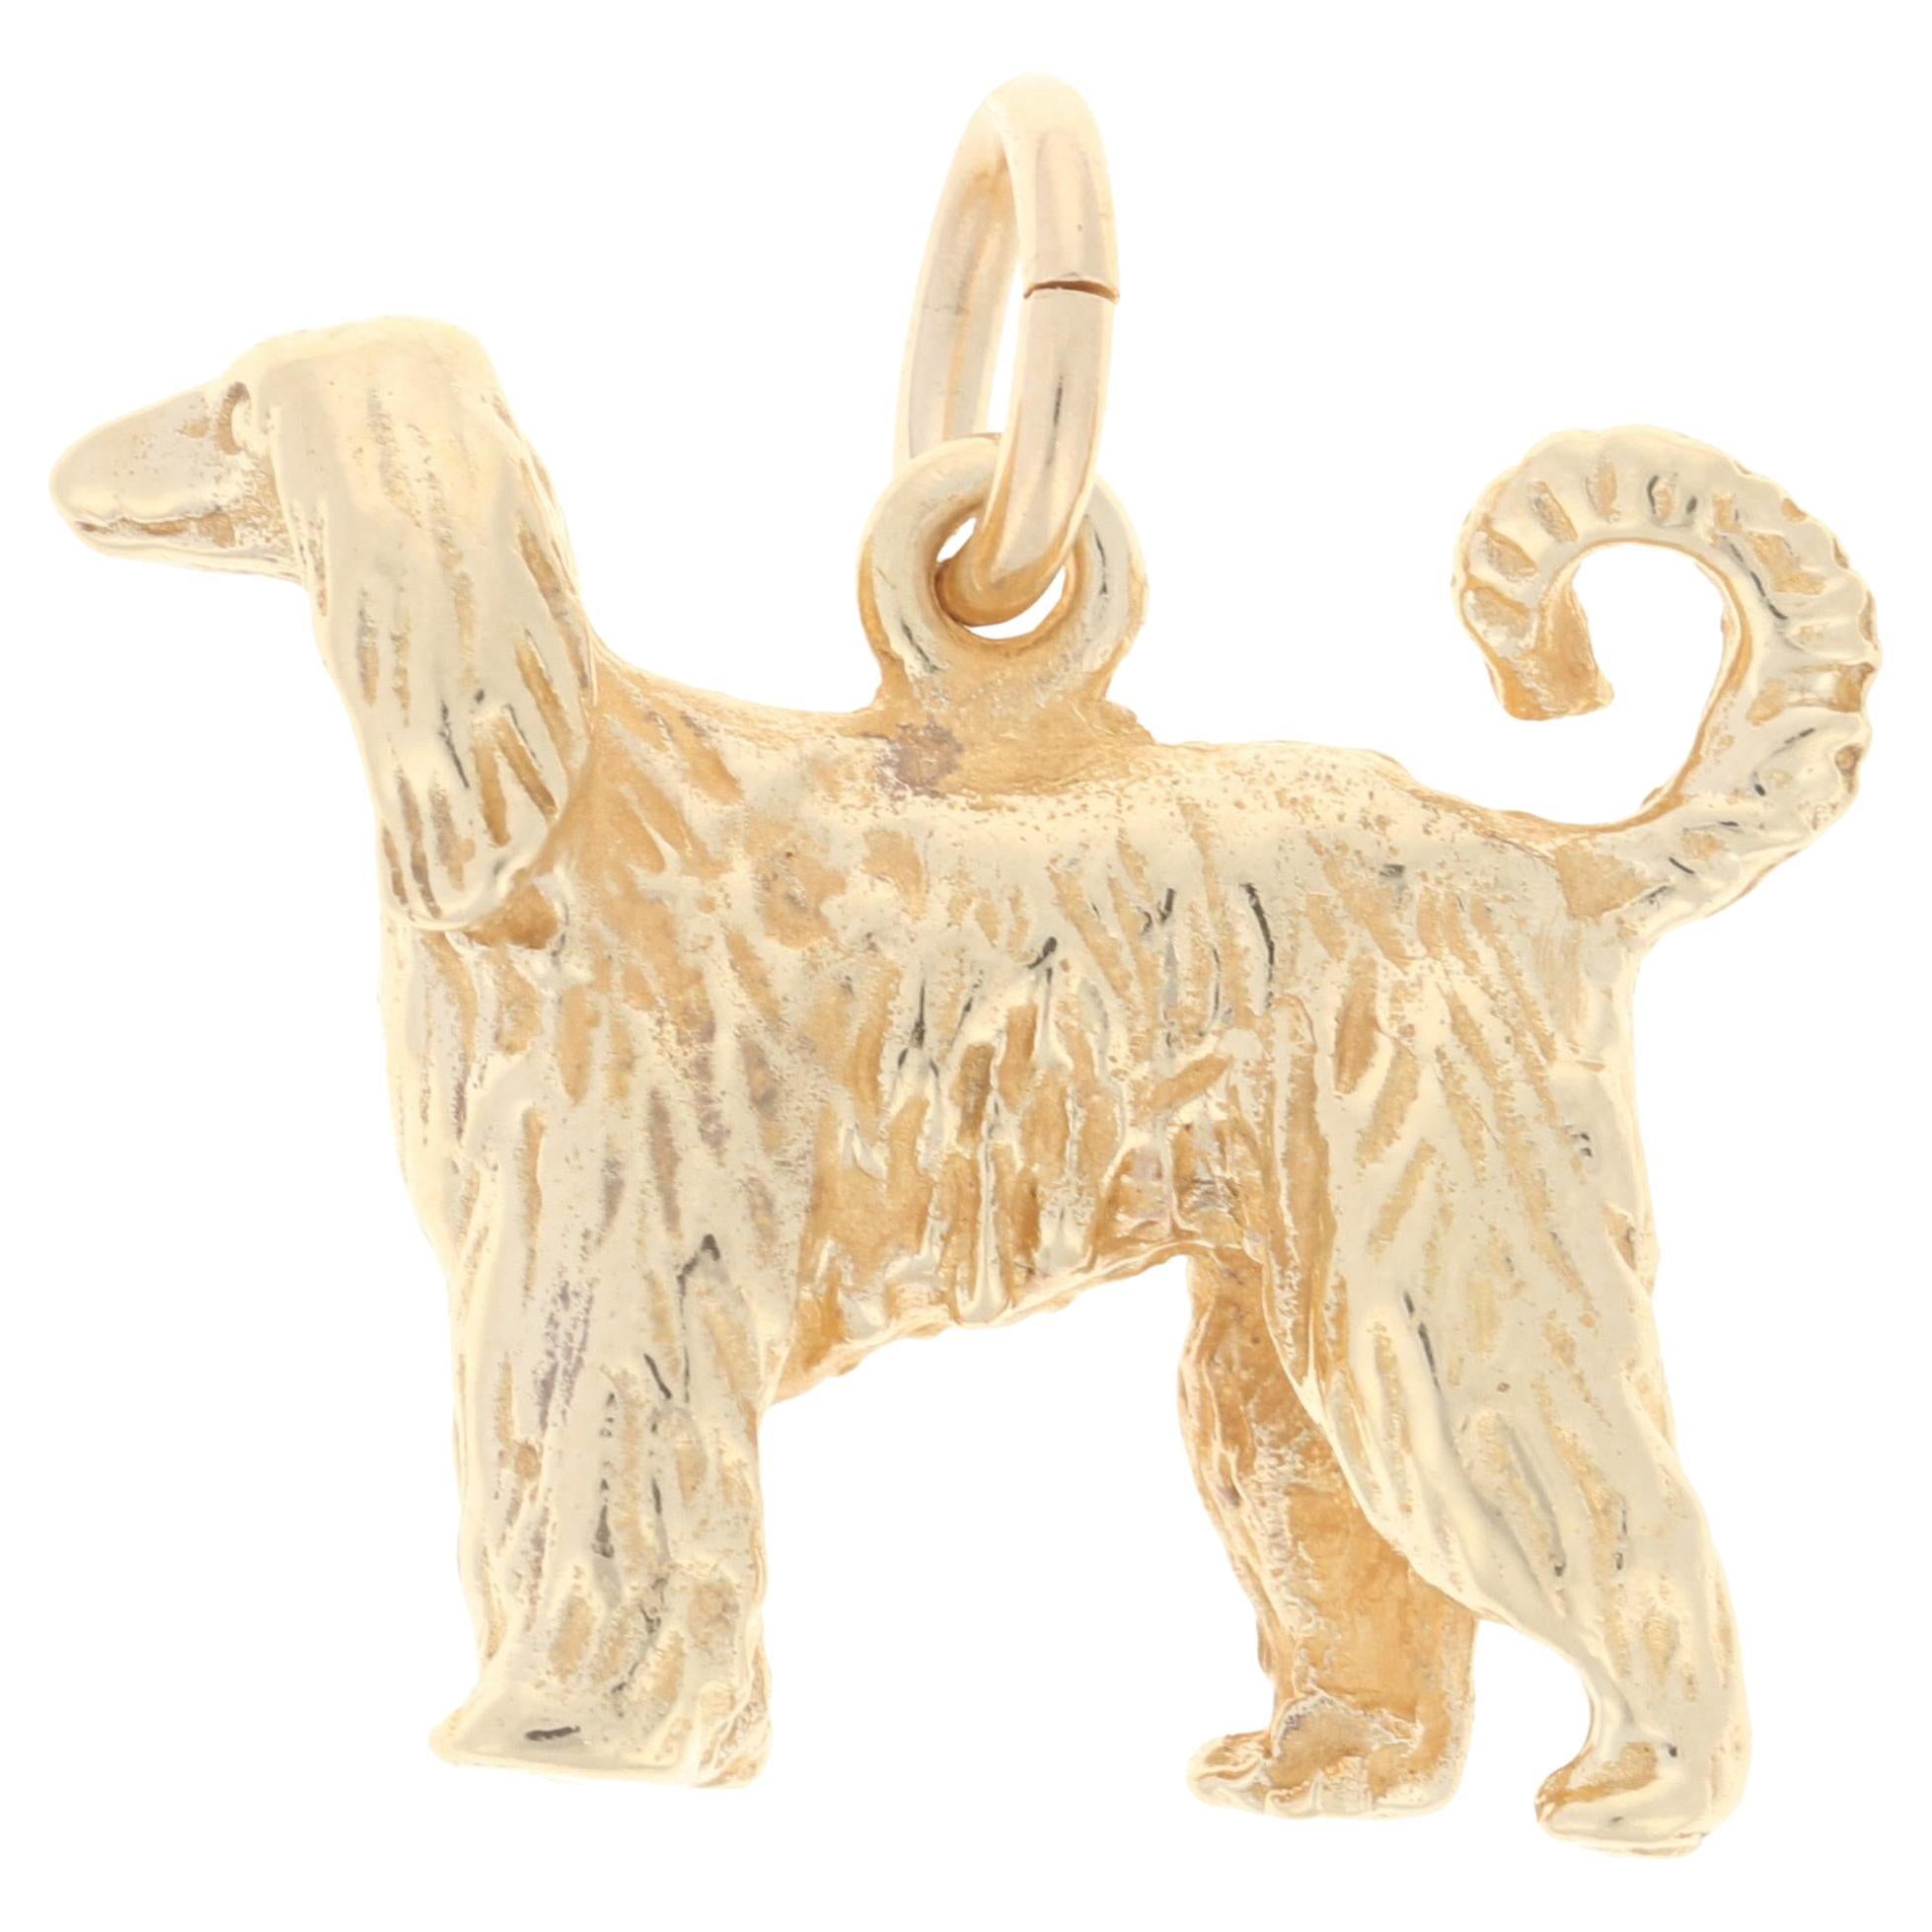 Details about   AFGHAN HOUND ORNAMENT Hard-Cast Resin Hanging/Free Standing!! JWM Collection 